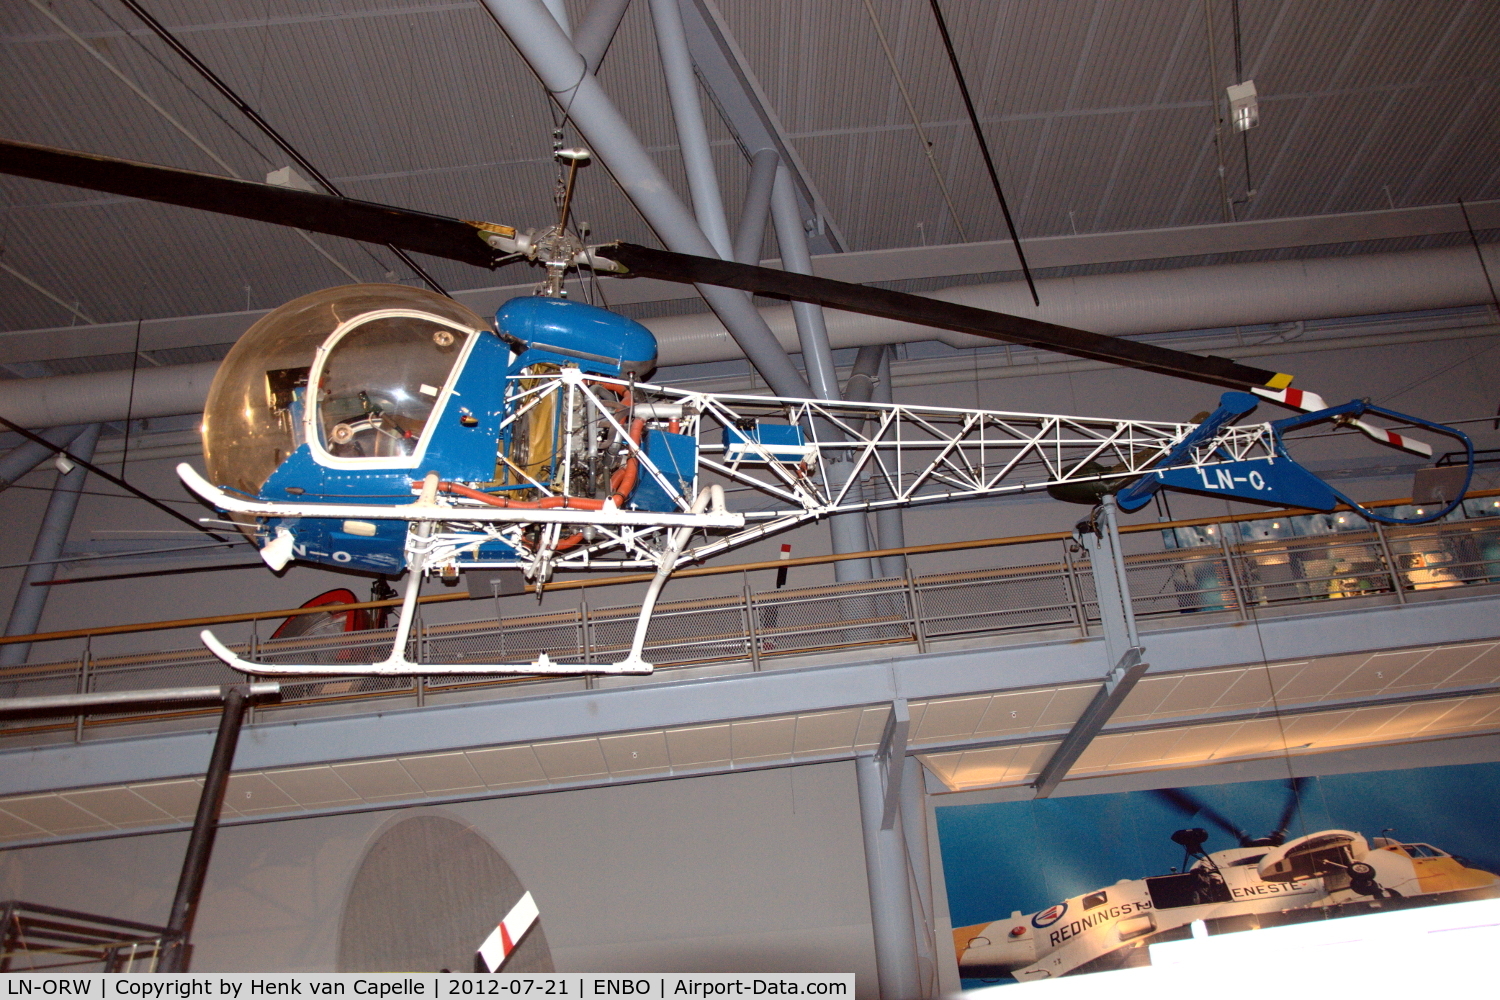 LN-ORW, Bell 47D-1 C/N 632, Bell 47D-1 helicopter, preserved in the Norsk luftfartsmuseum, Bodø, Norway.